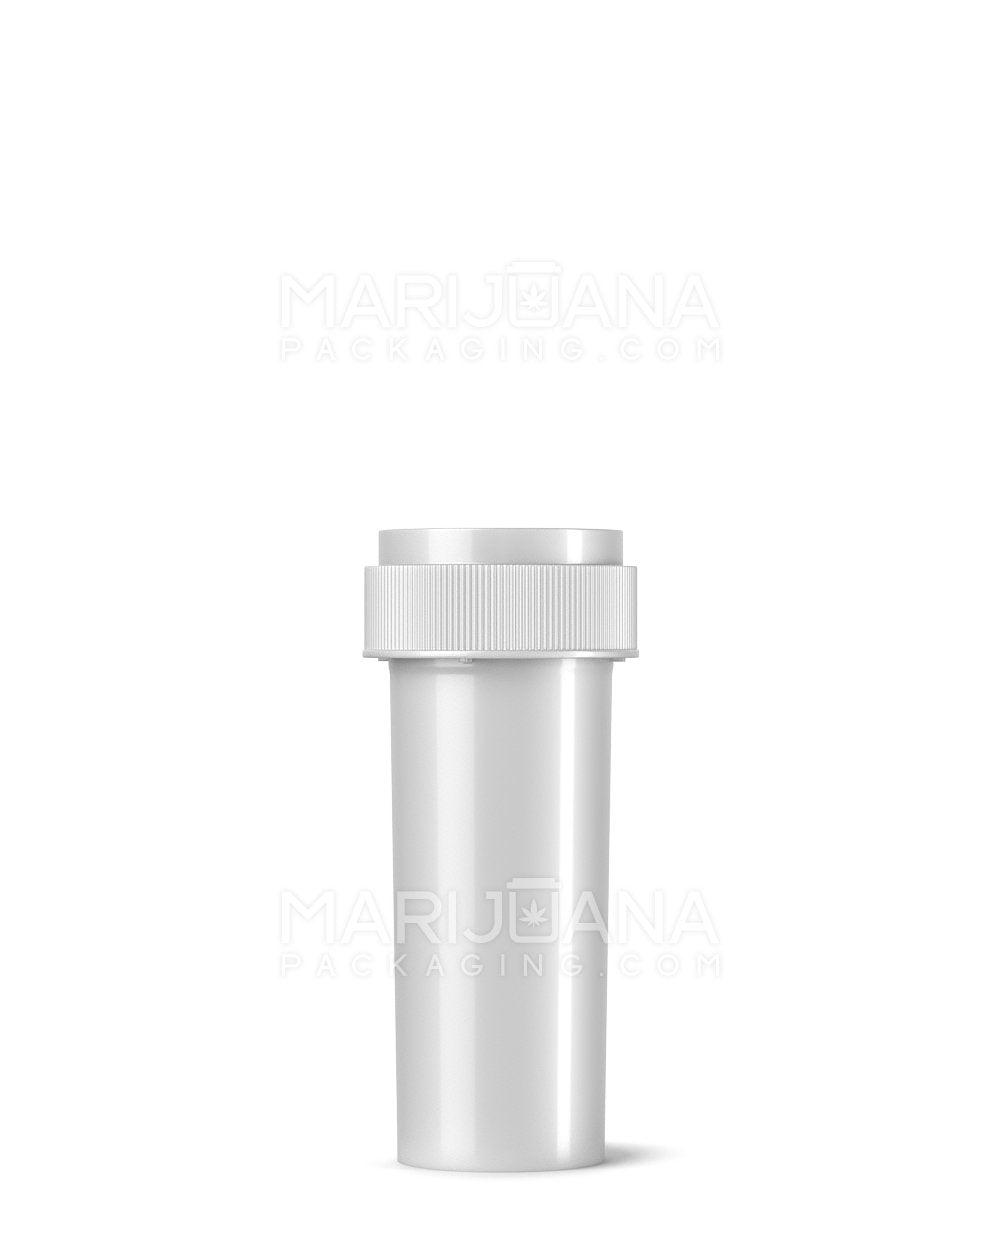 Child Resistant Opaque Silver Blank Reversible Cap Vials | 16dr - 3g | Sample - 1